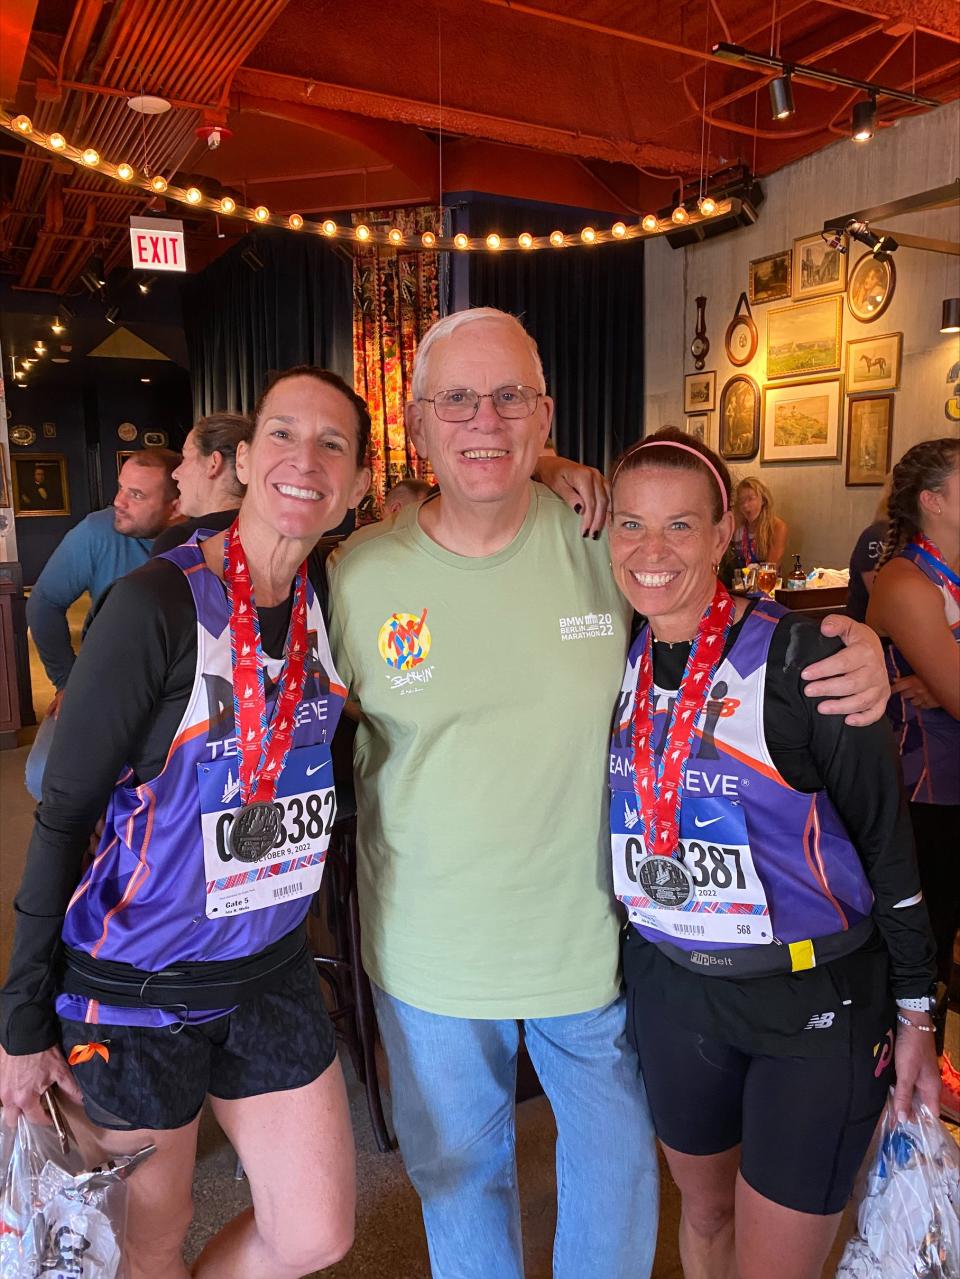 Mark Zenobia with Team Reeve runners Dana Hartman and Keri Maskell after the Chicago Marathon. Zenobia worked with hundreds of athletes who wanted to raise money for Team Reeve through competitive racing.